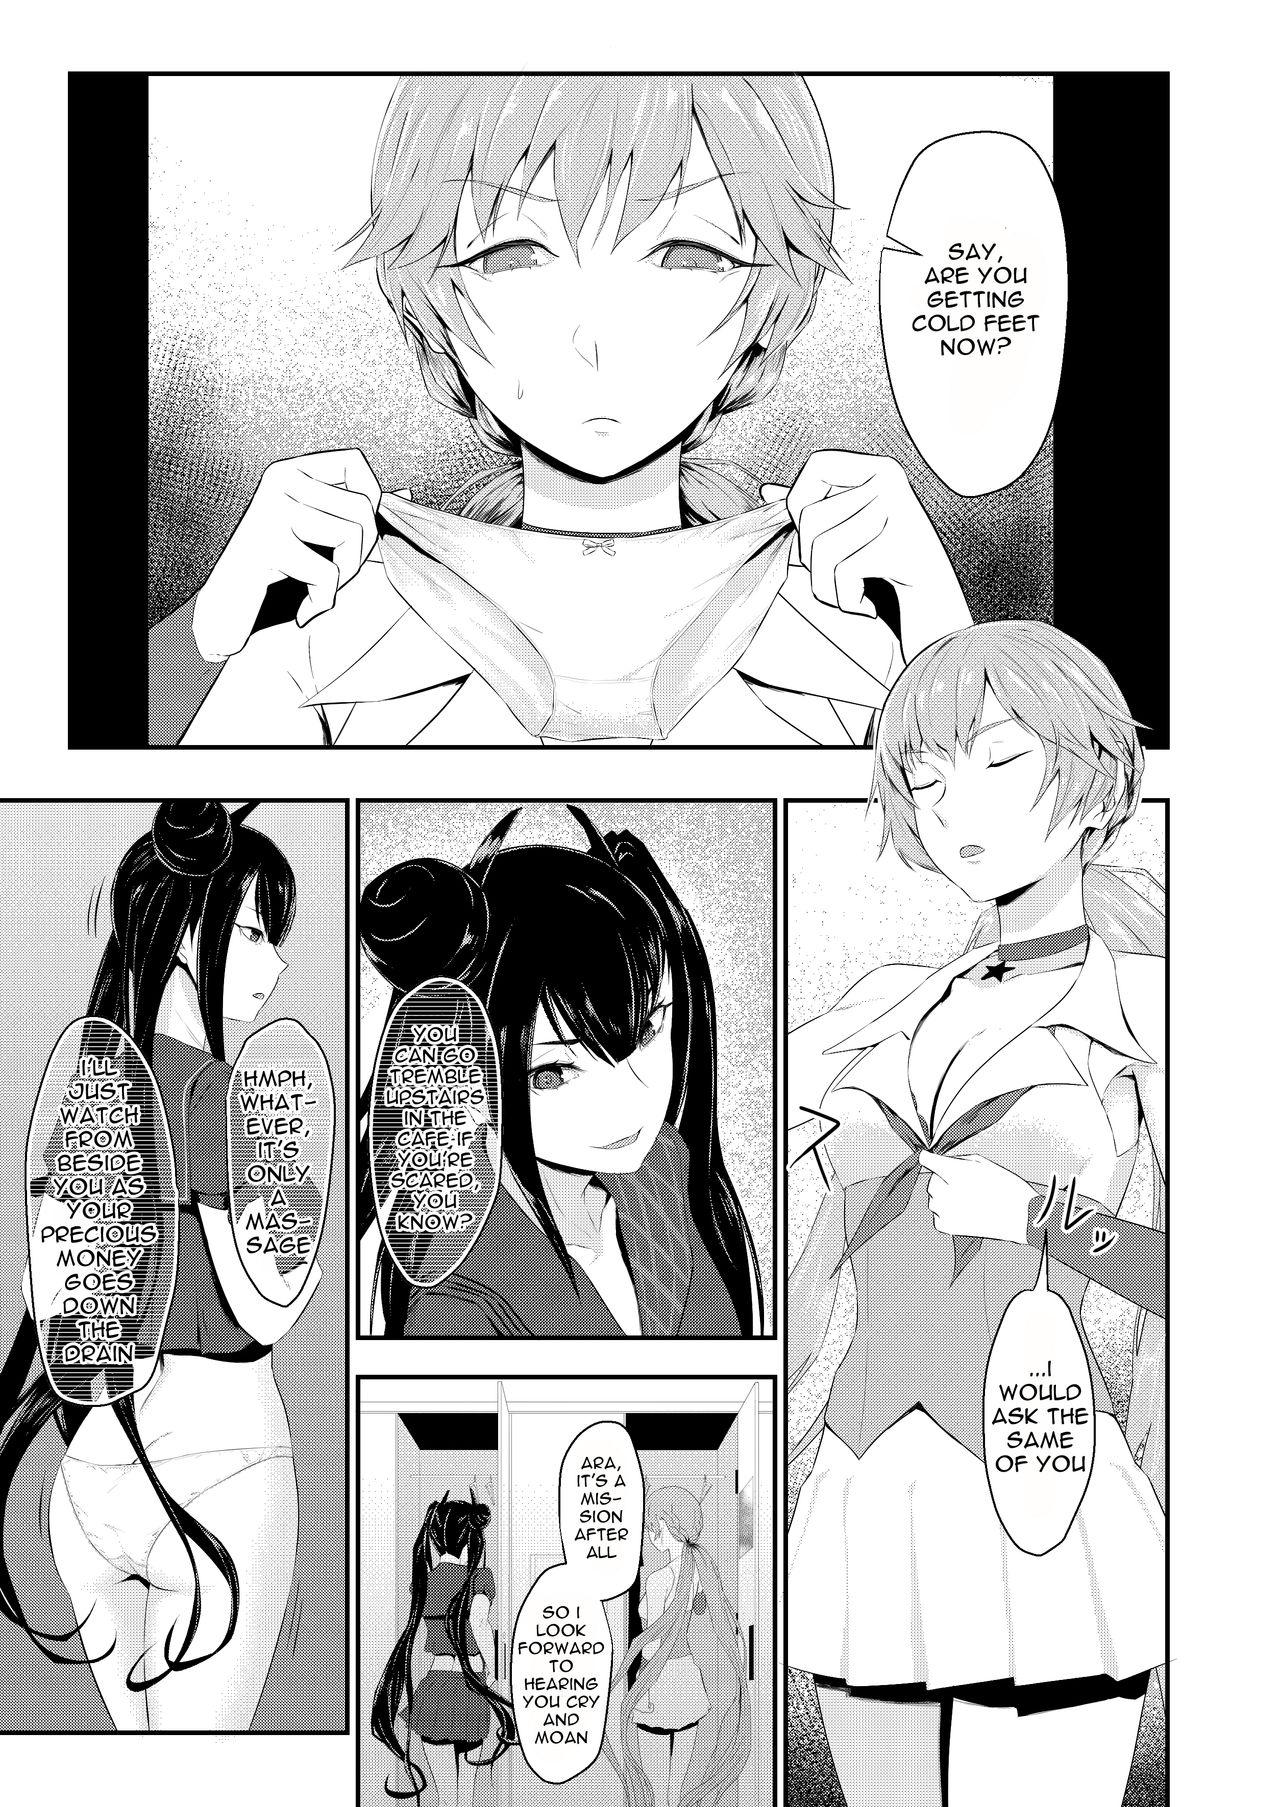 Amateur Porn Free Enchou suru nara Watashi mo... | If You're Getting An Extension, Then I'll Have One Too... - Girls frontline Black Gay - Page 3